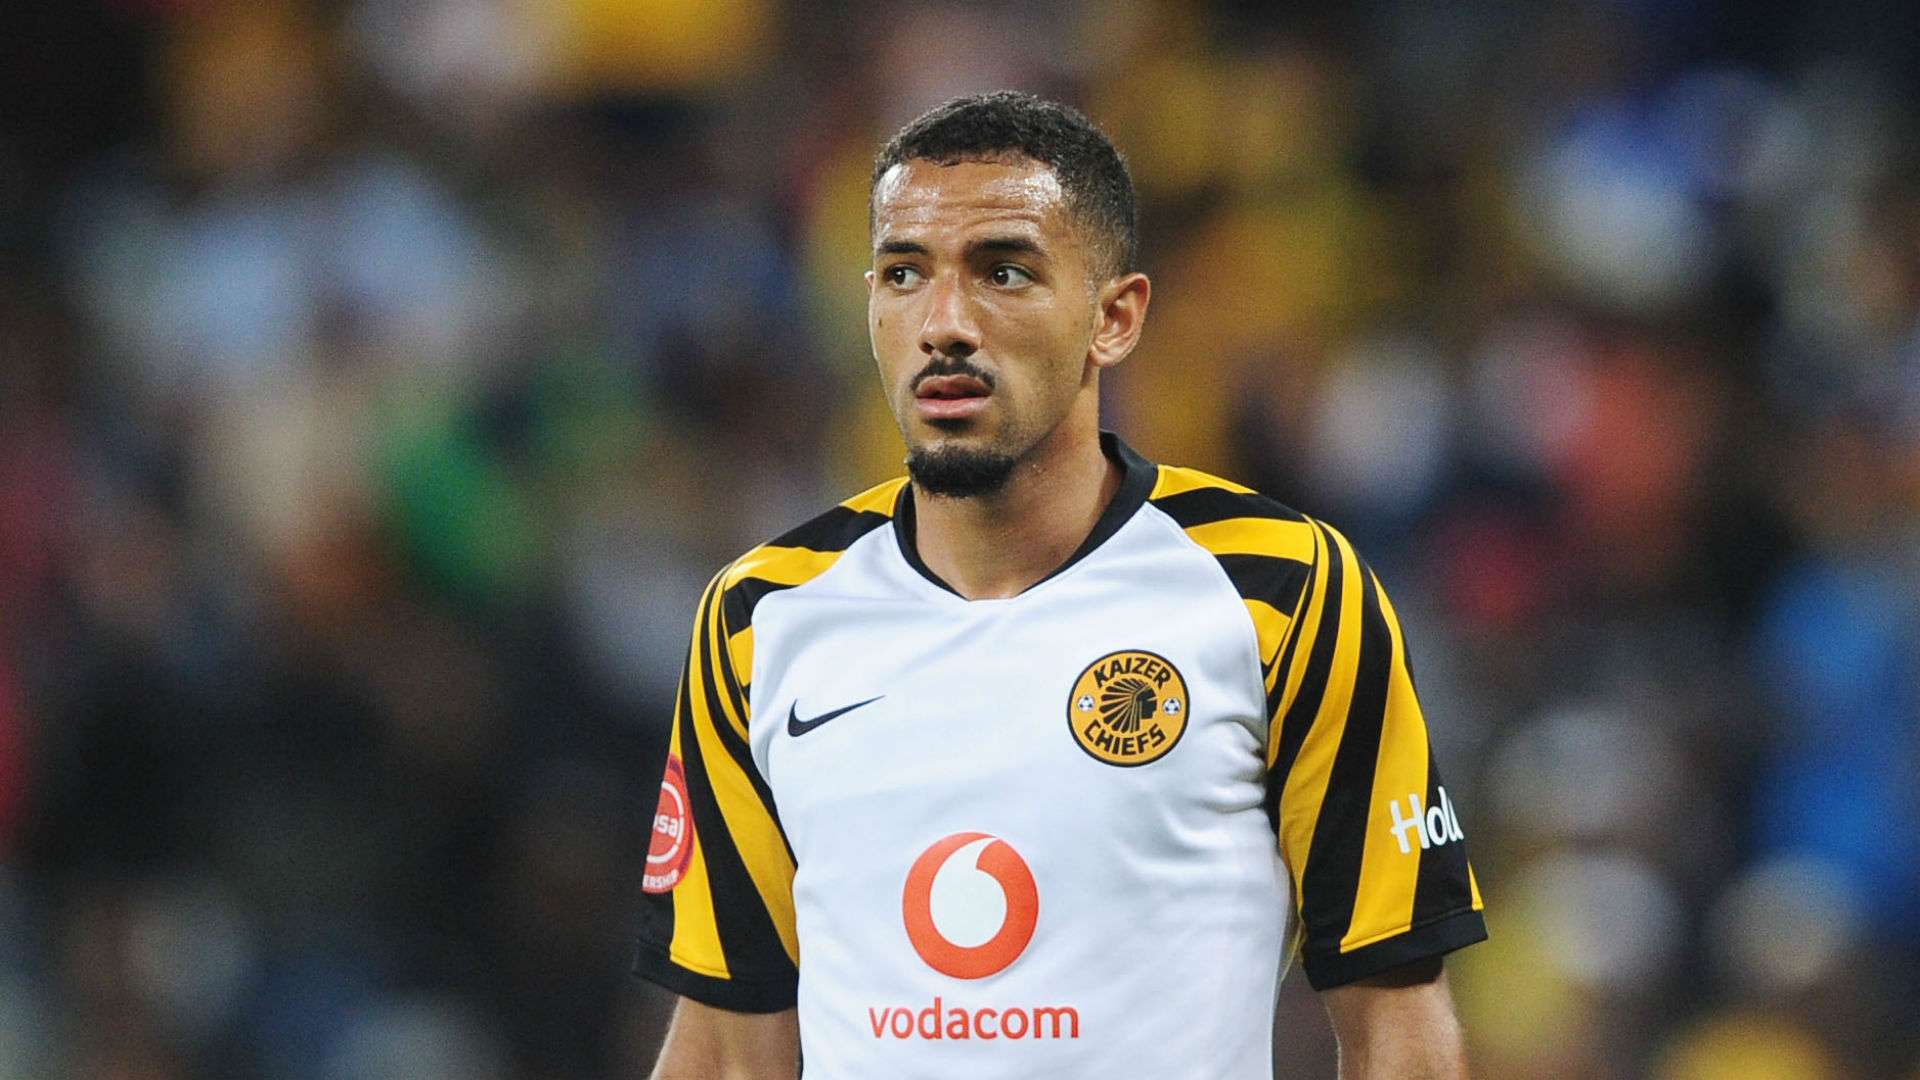 Reeve Frosler of Kaizer Chiefs., 2019